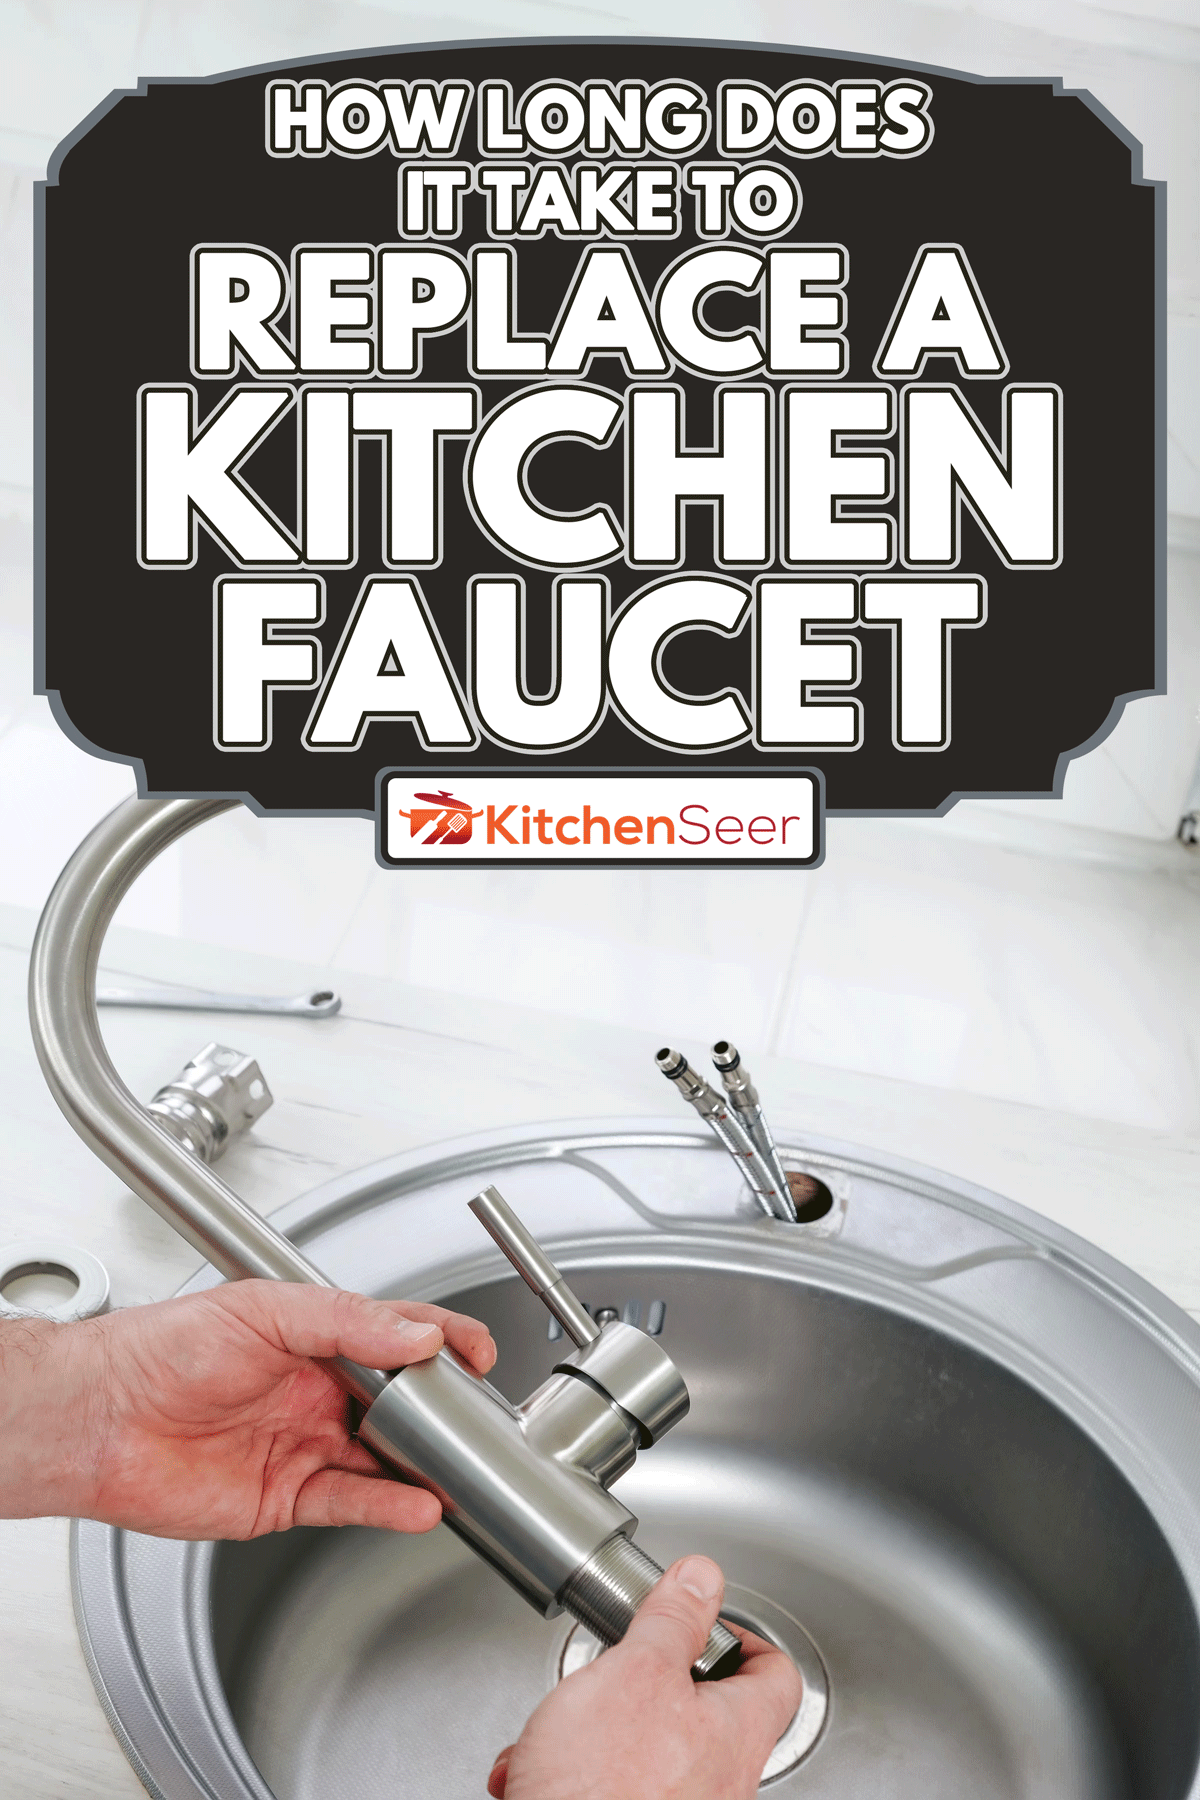 Plumber hand holds a new faucet for installing into the kitchen sink, How Long Does It Take To Replace A Kitchen Faucet